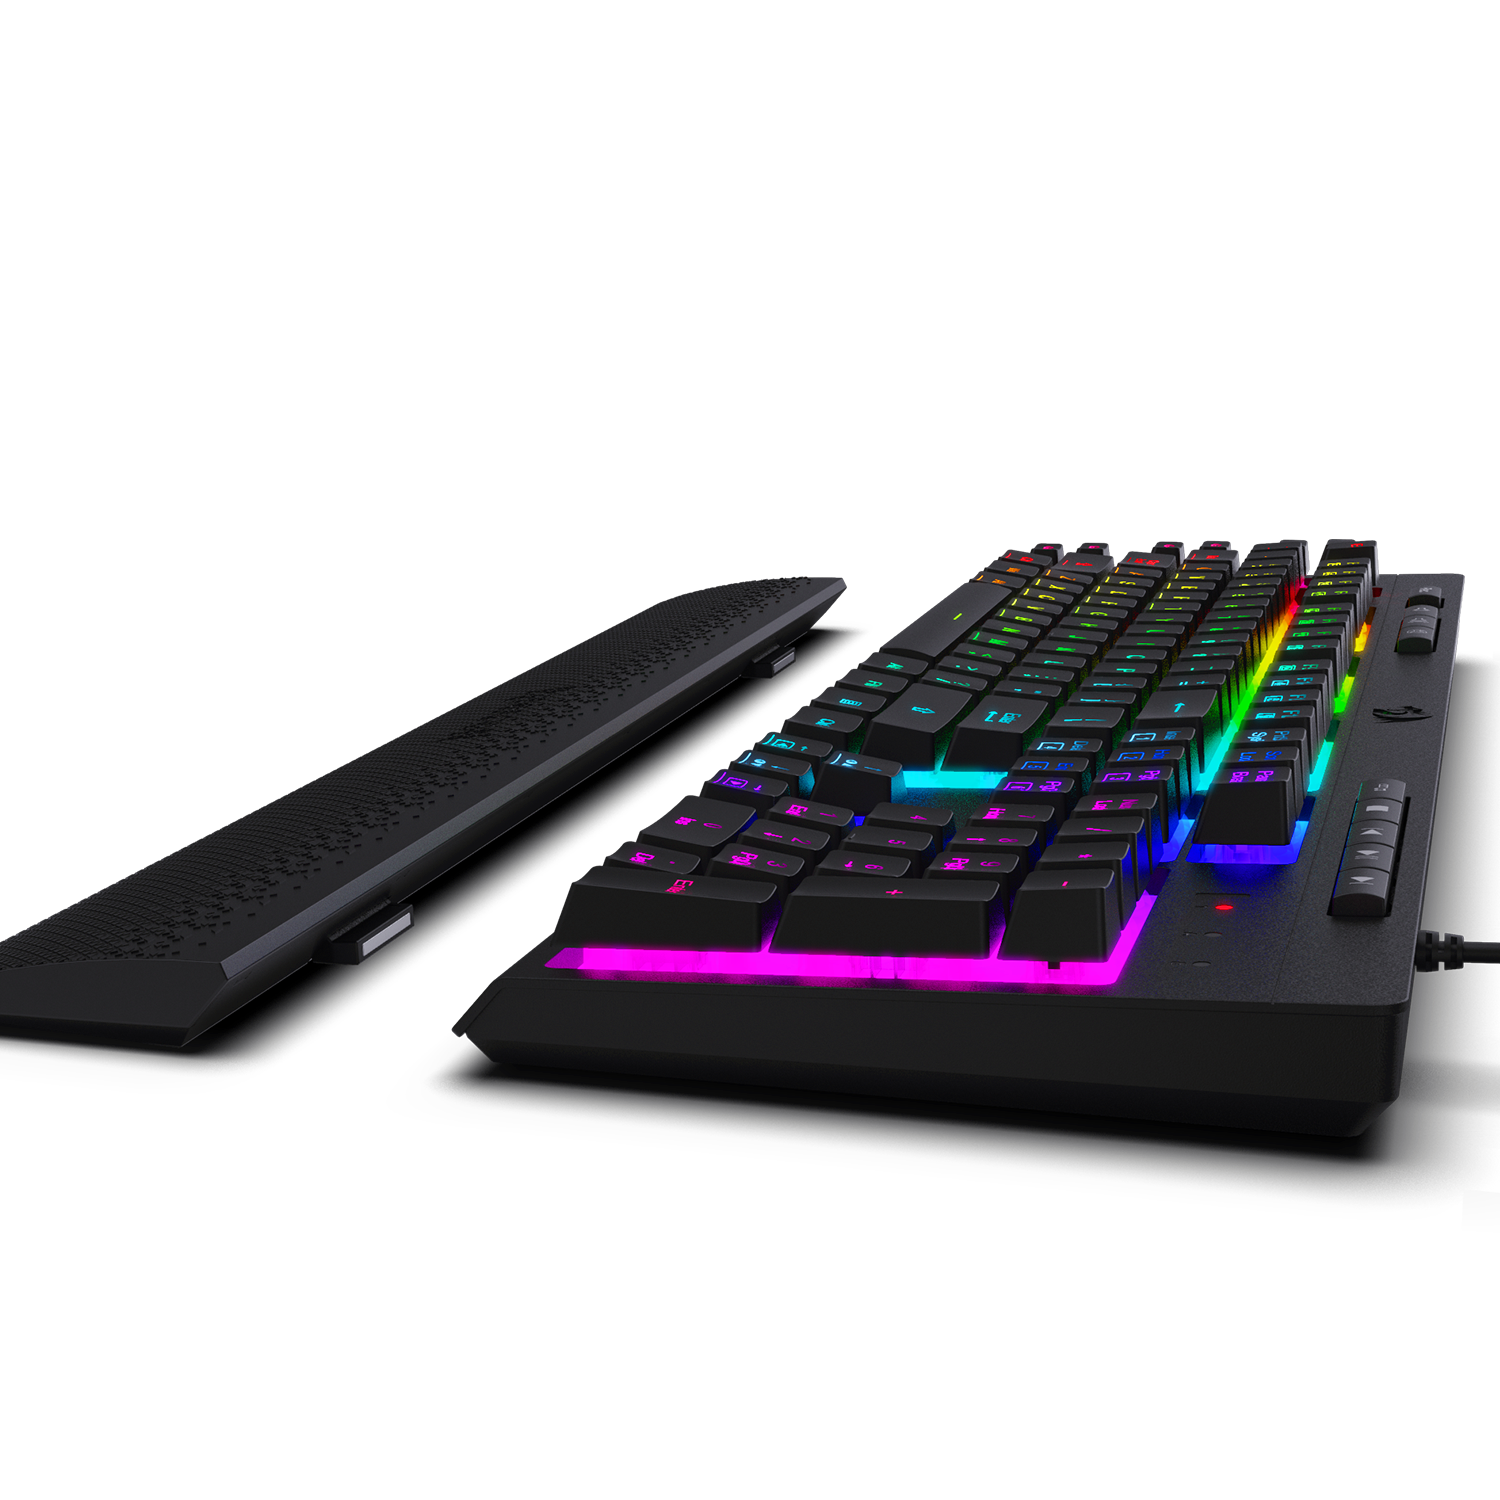 membrane keyboard with Detachable Wrist Rest